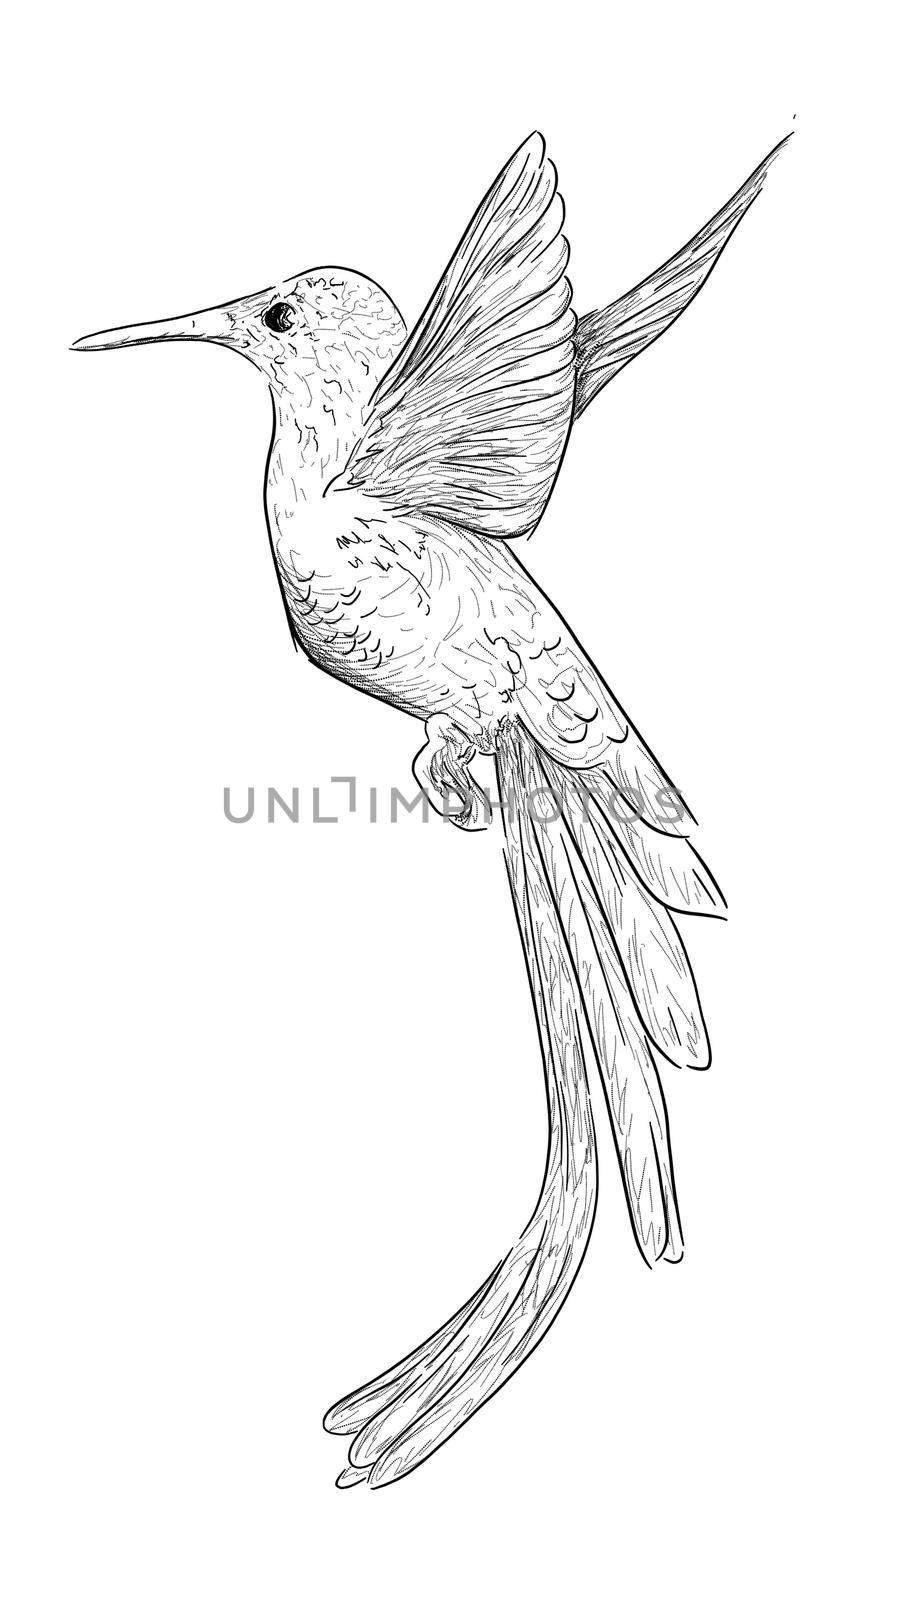 outline sketch in graphic style flying bird illustration